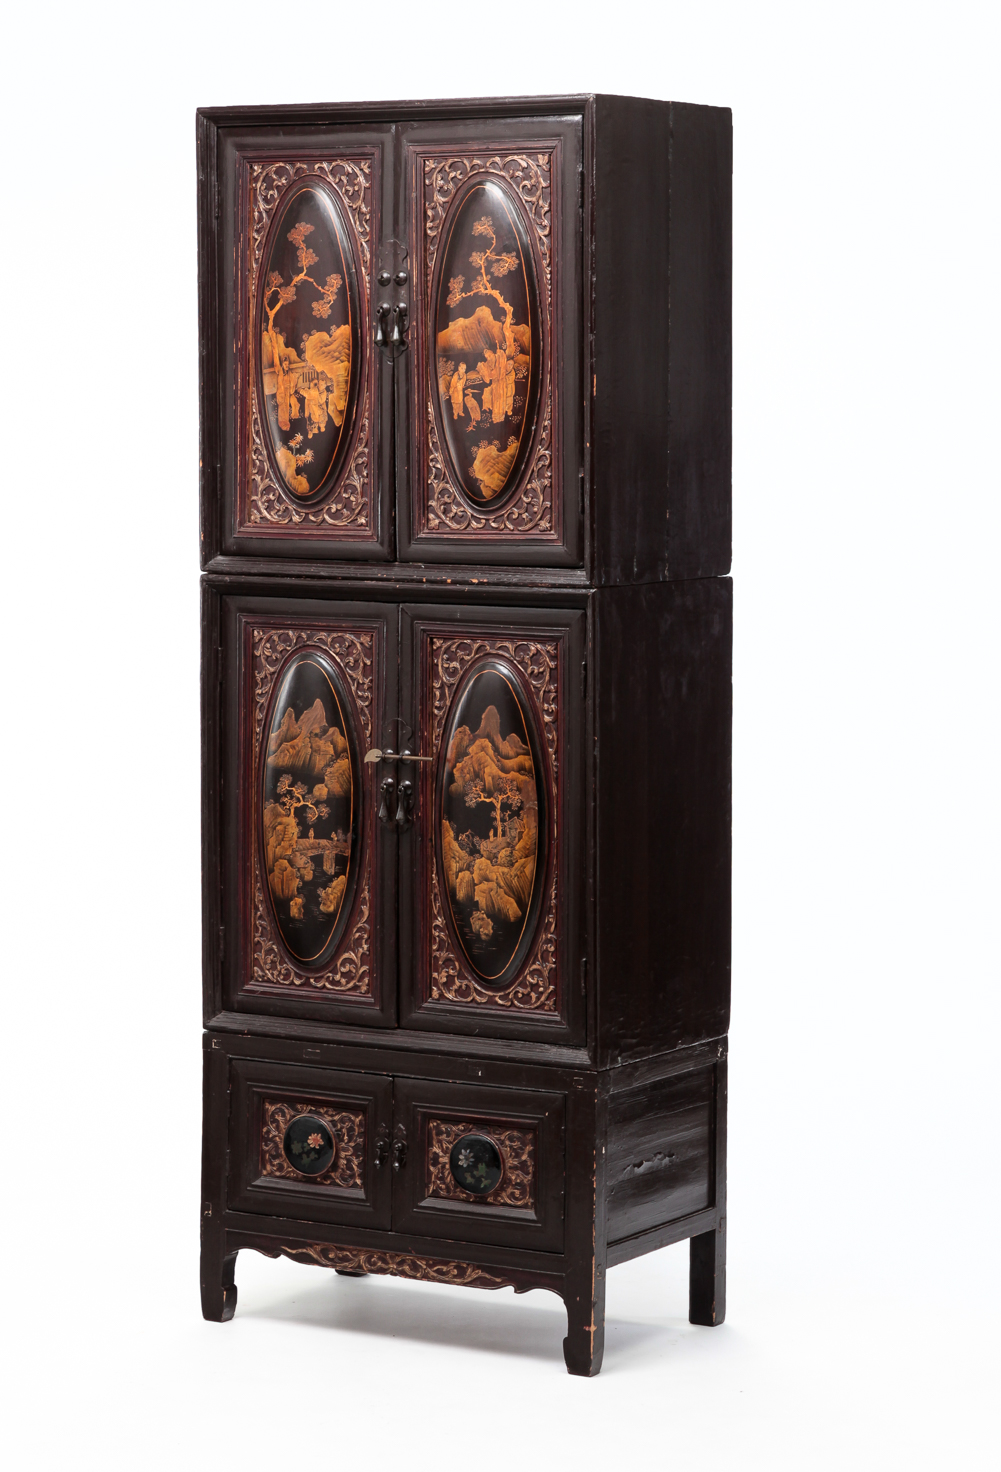 CHINESE LACQUERED CABINET Late 2e016c